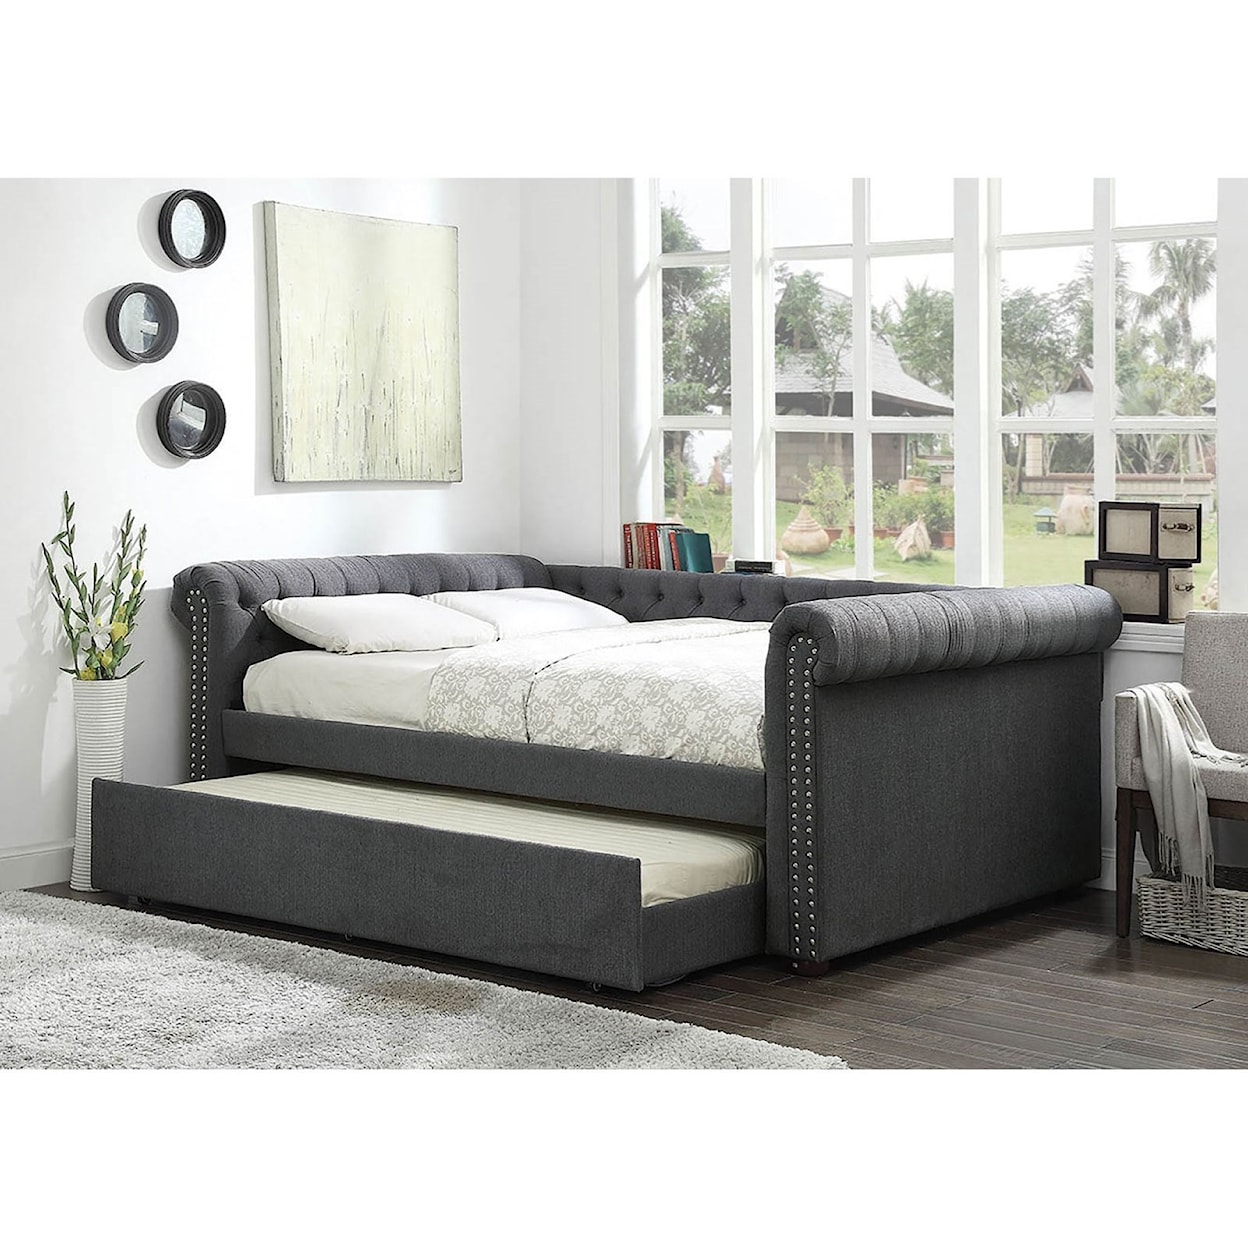 Furniture of America - FOA Leanna Queen Daybed w/ Trundle 